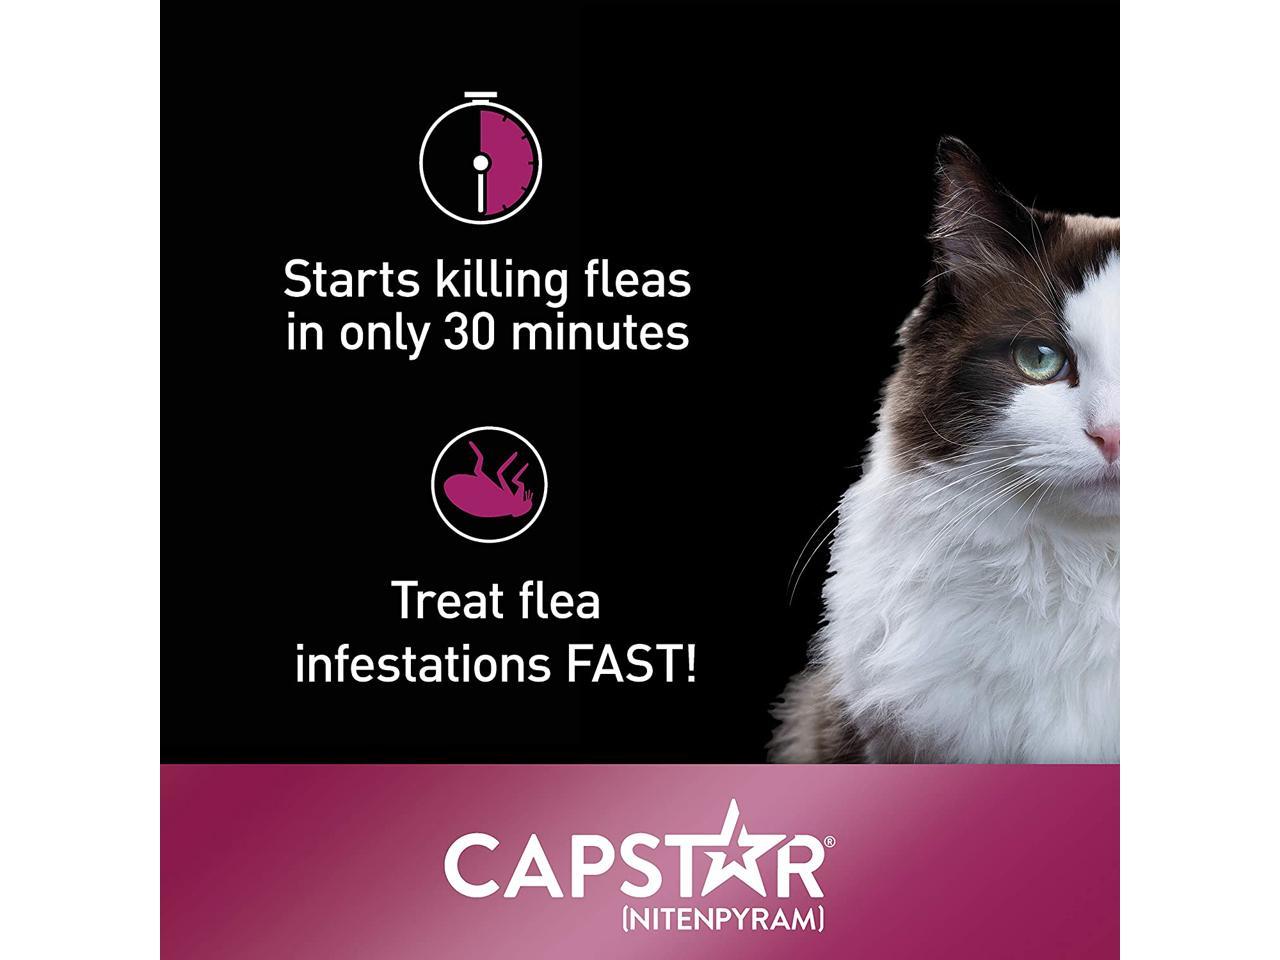 Capstar FastActing Oral Flea Treatment for Cats, 6 Doses, 11.4 mg (2